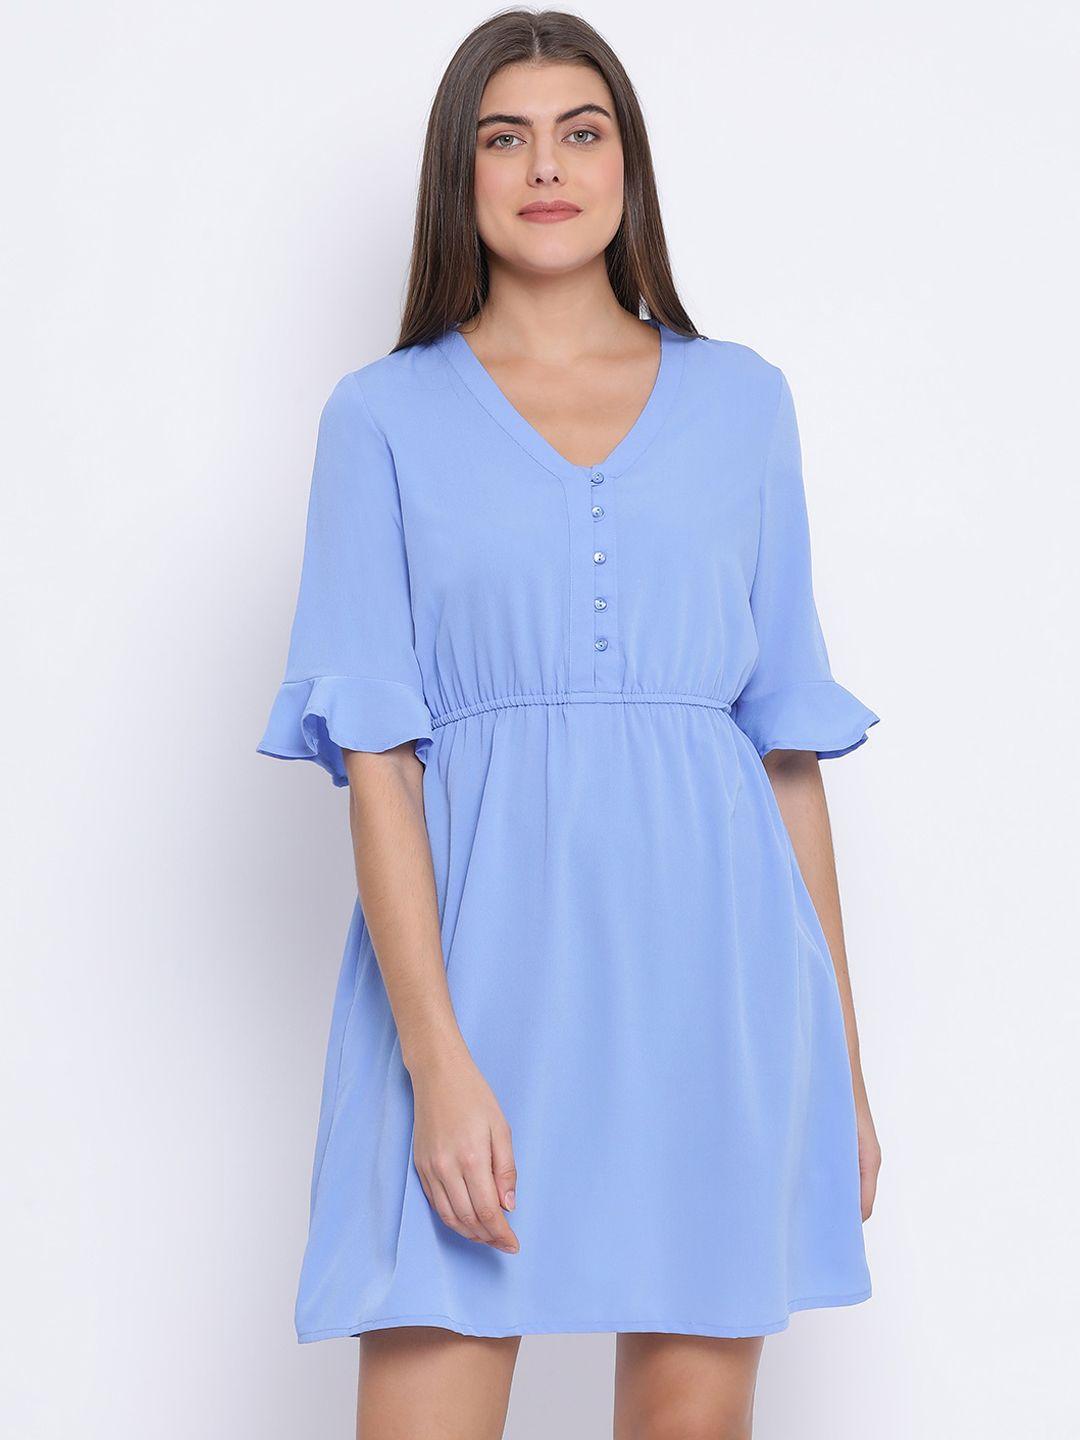 oxolloxo women blue solid fit and flare dress